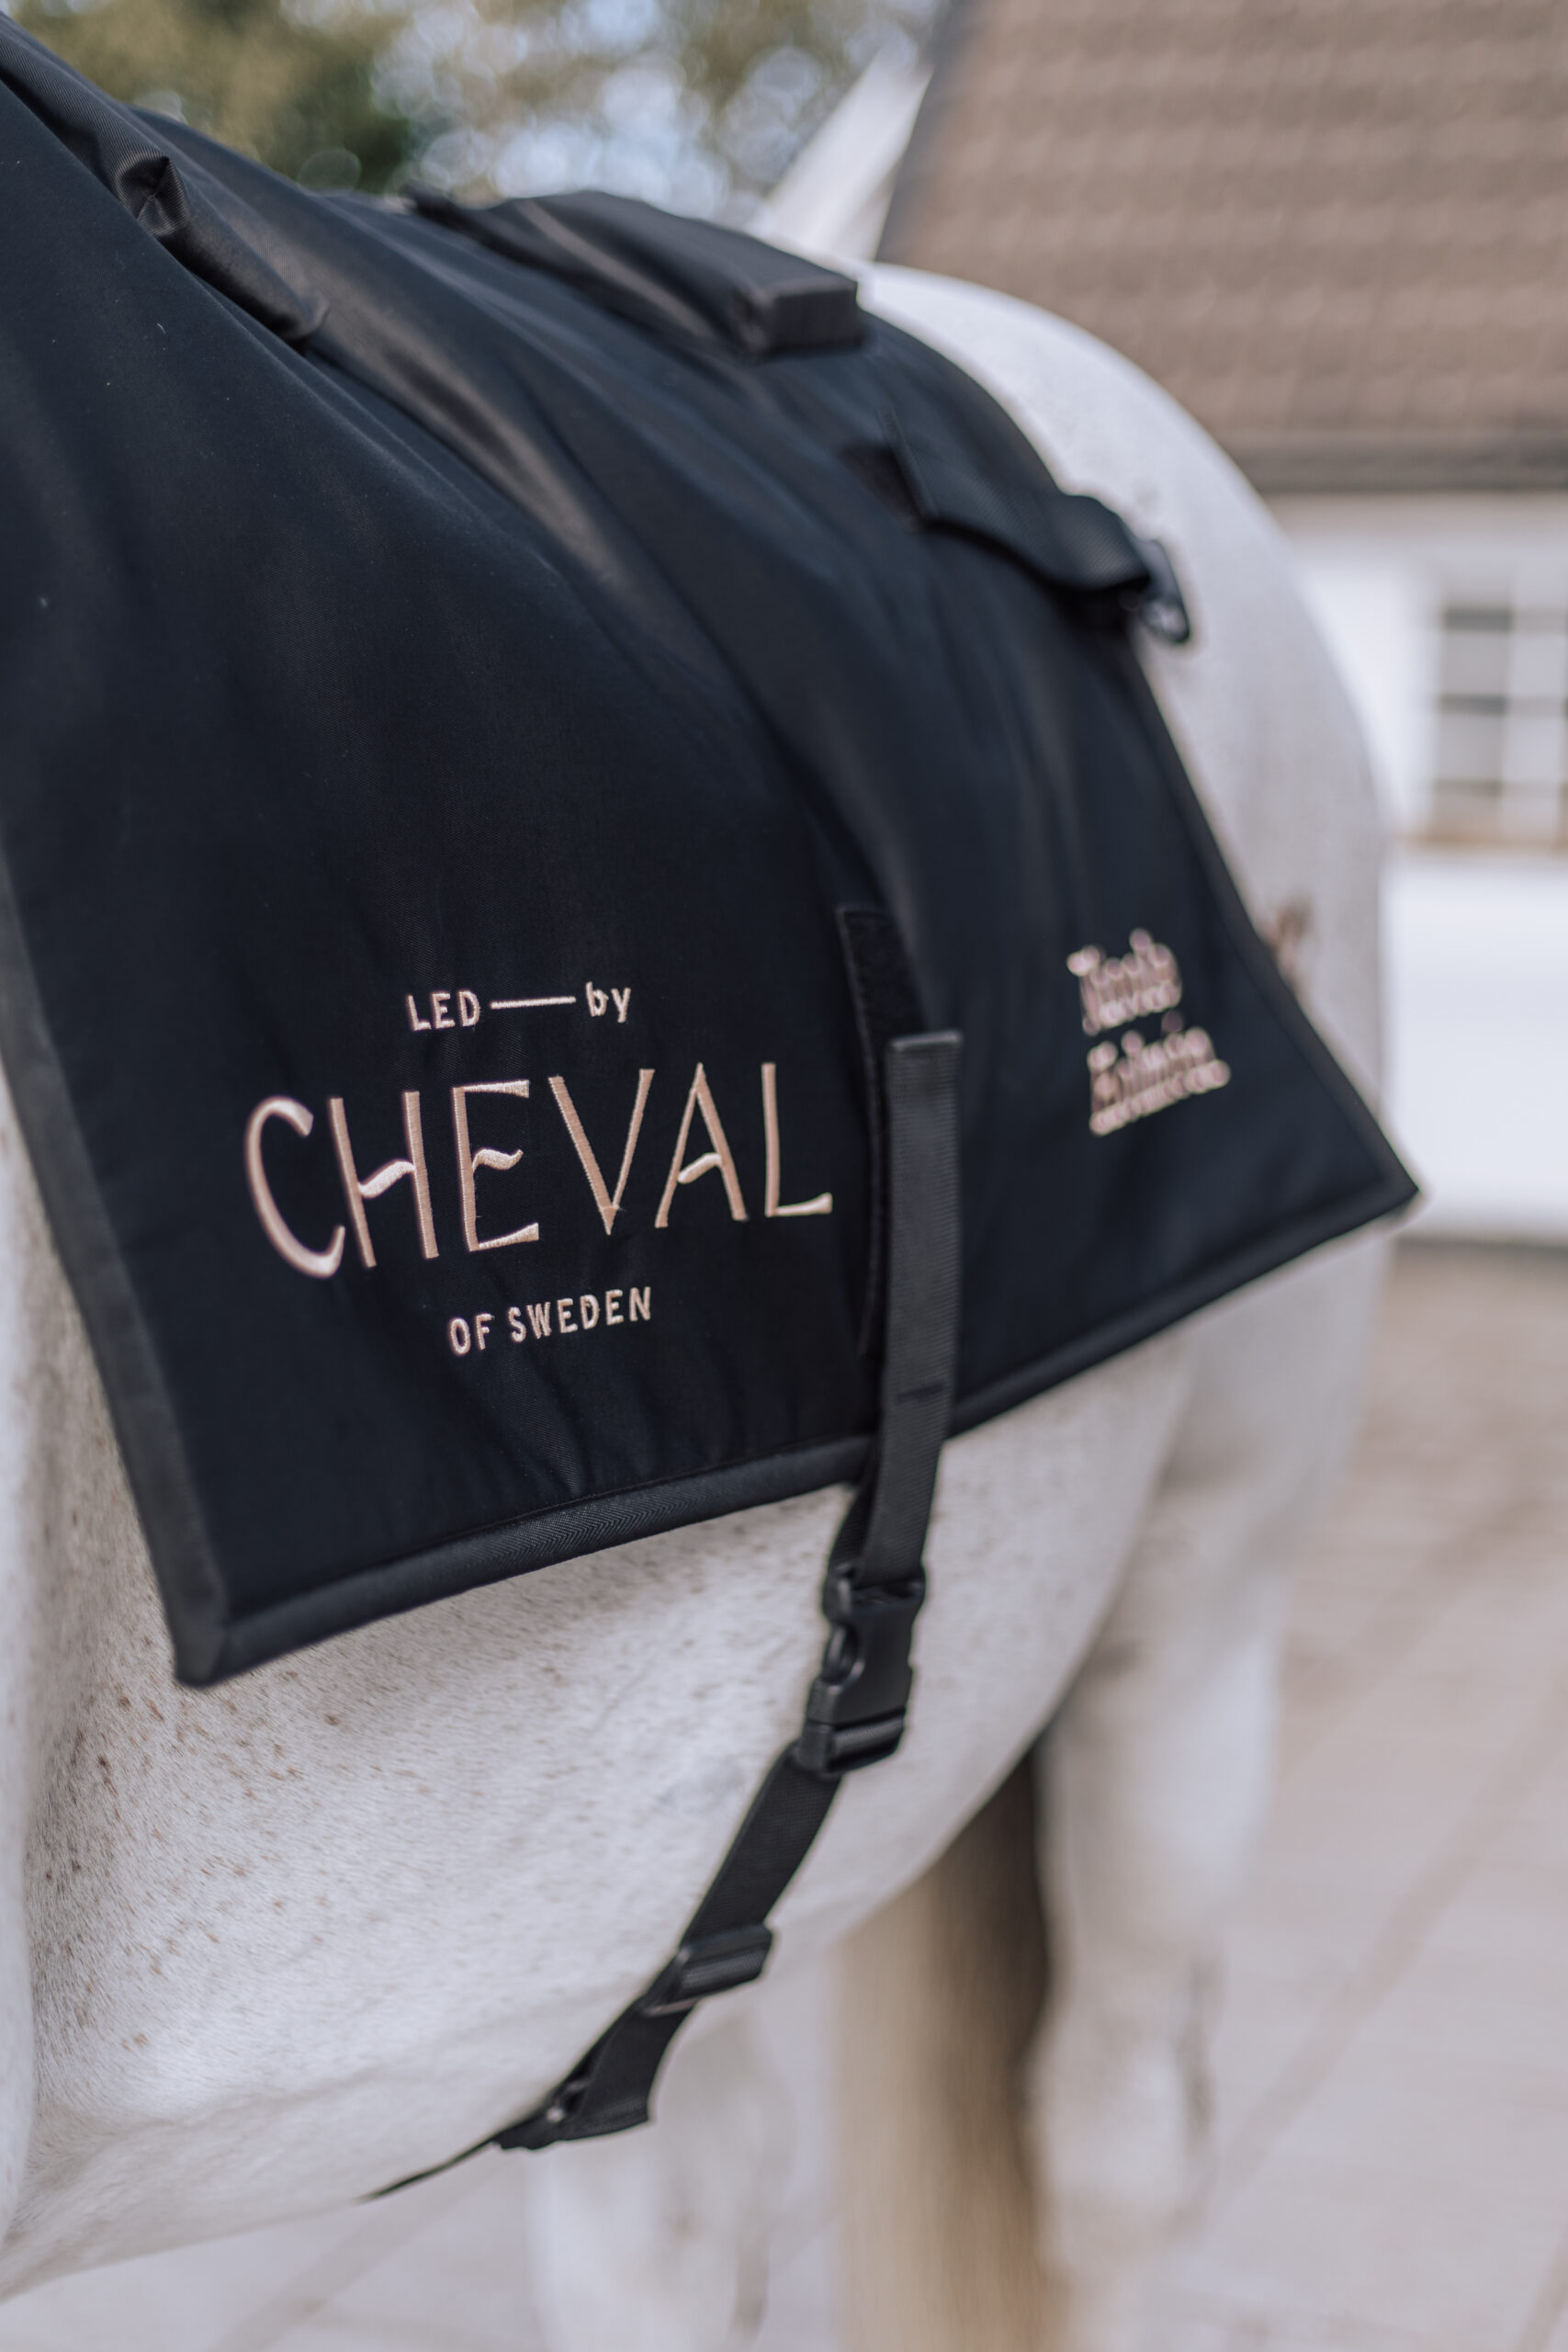 Contact Us - LED CHEVAL by